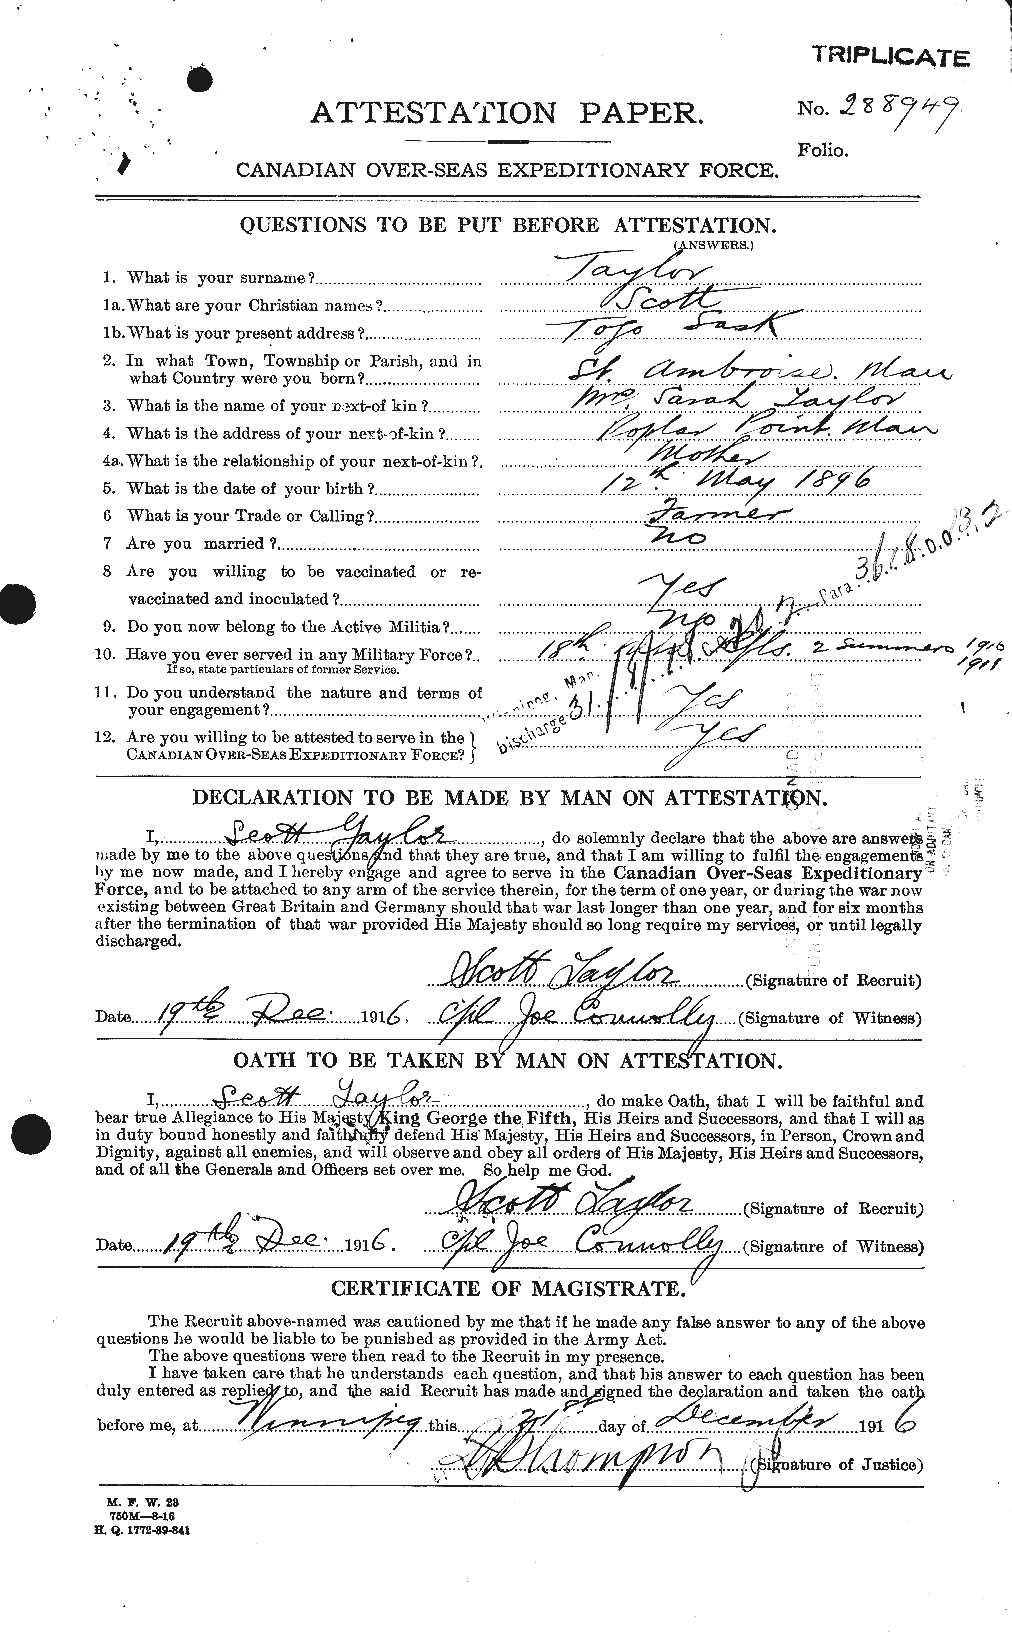 Personnel Records of the First World War - CEF 627888a